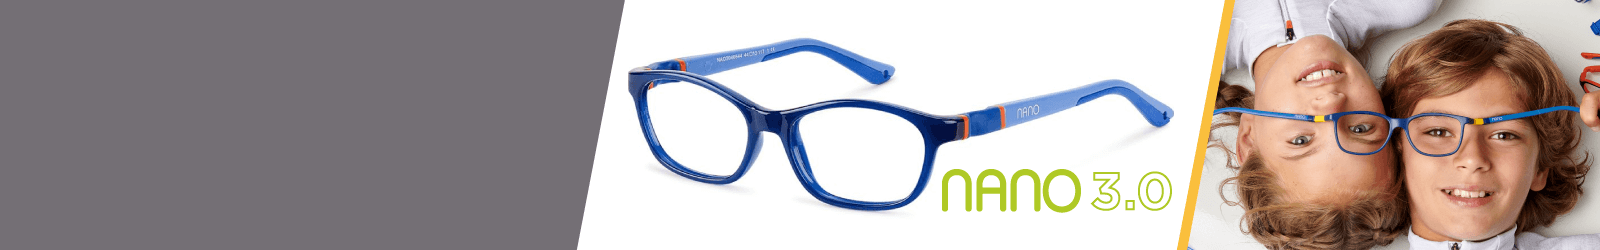 Nano 3.0 Indestructible Kids Glasses from 6 to 8-year-old